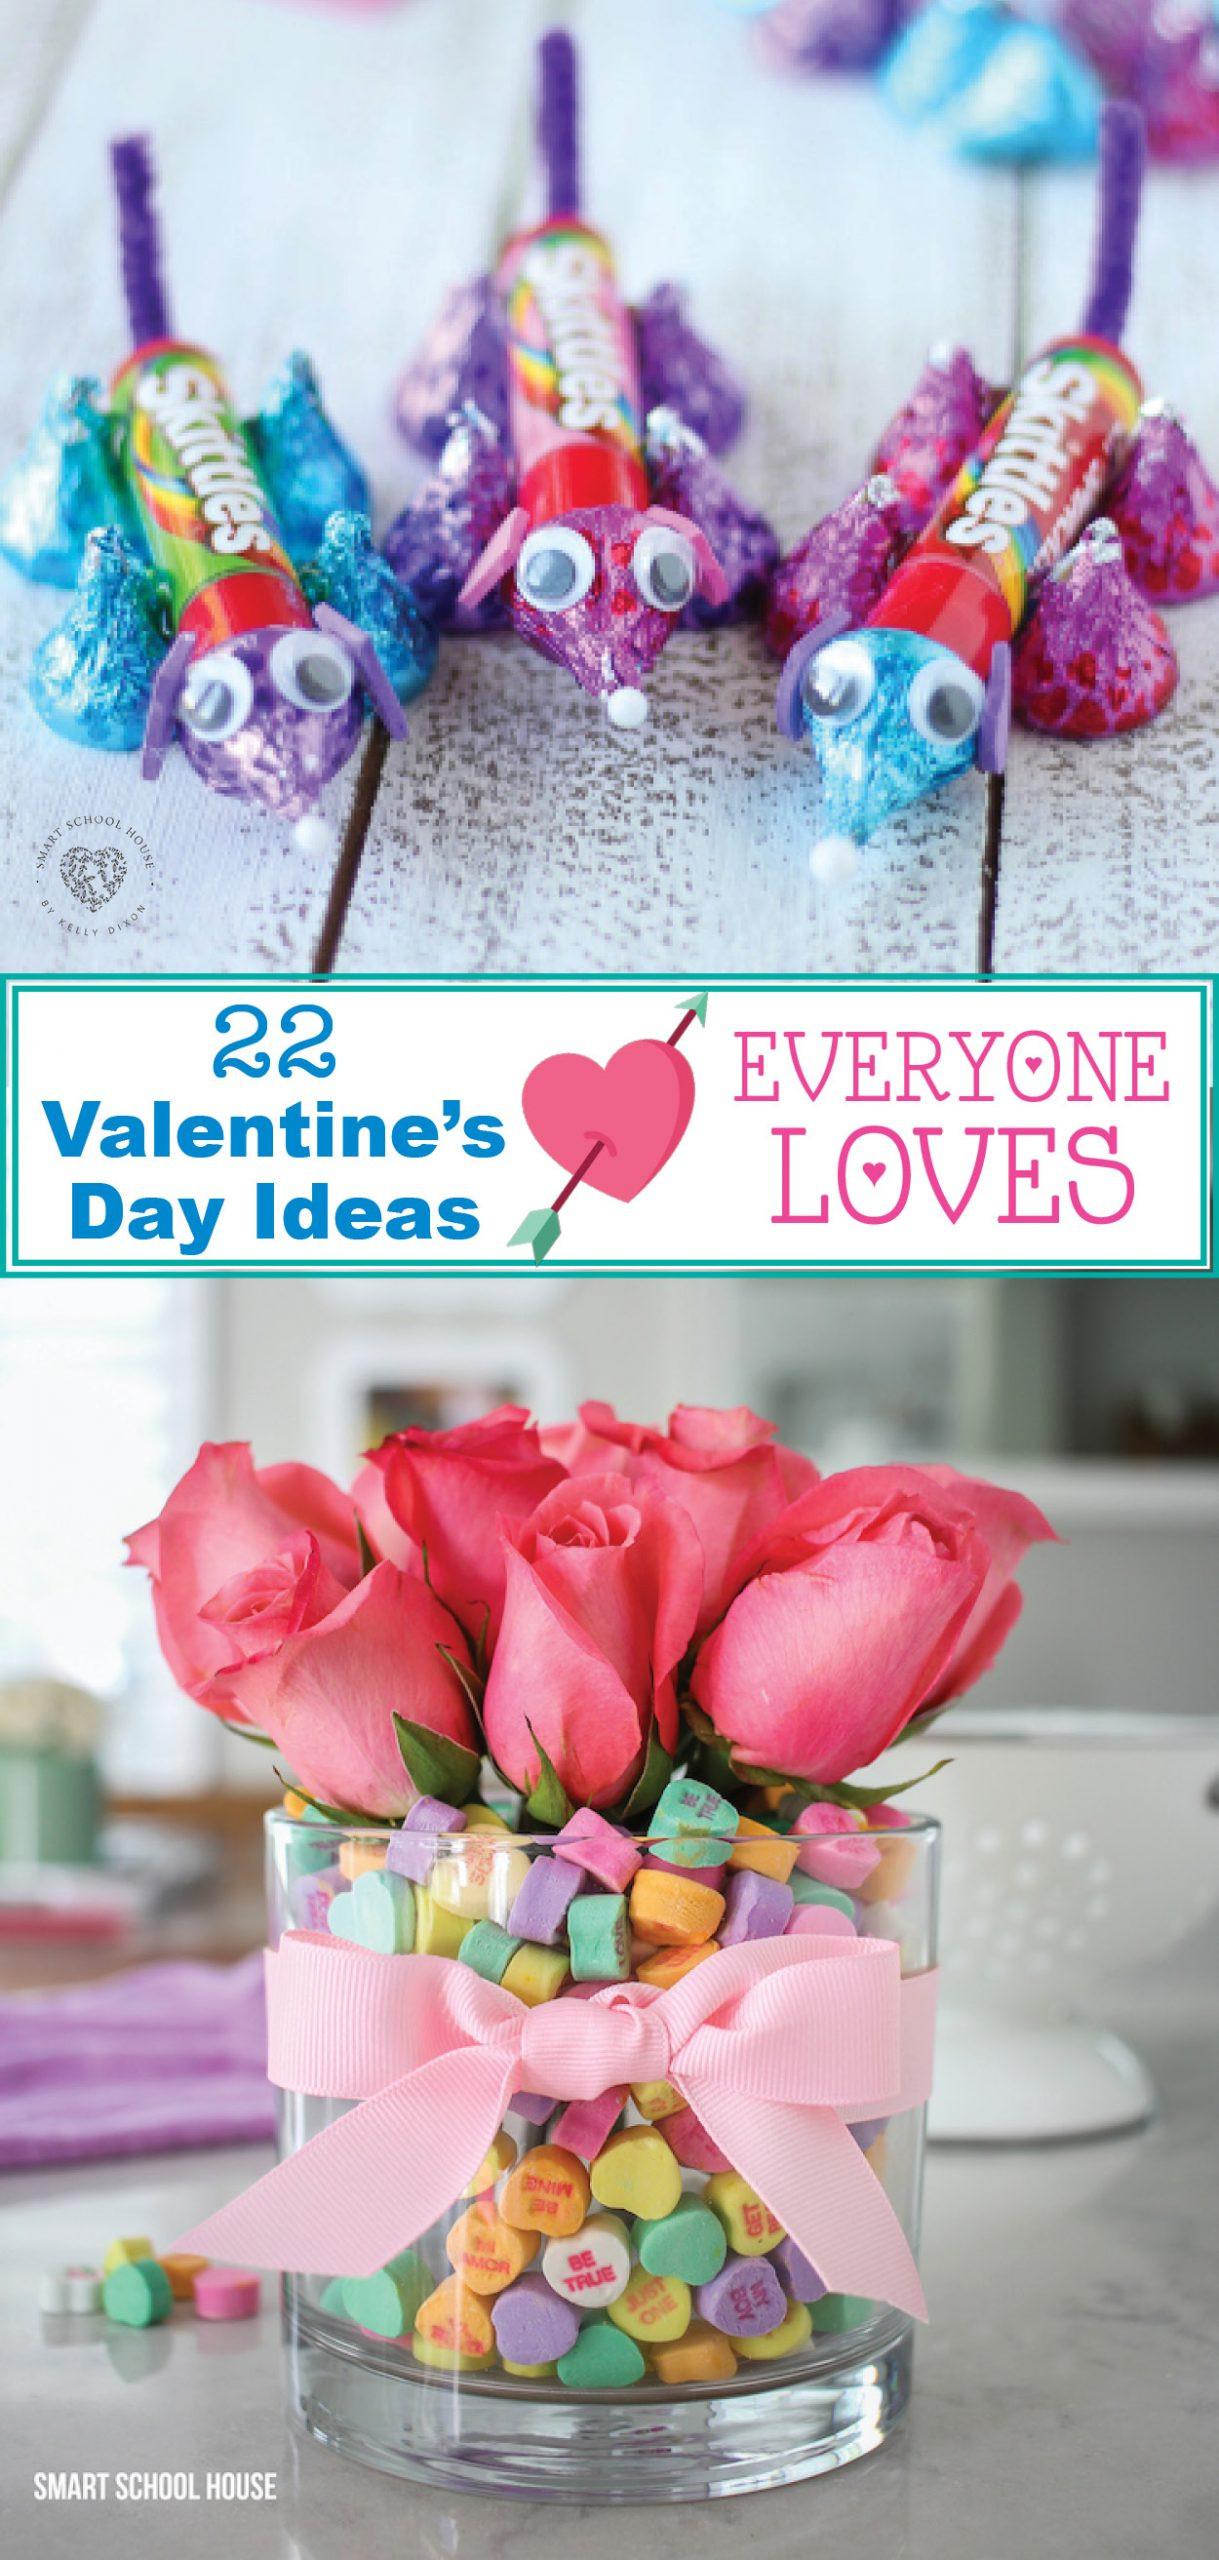 Work Valentines Day Ideas
 EASY VALENTINE S DAY IDEAS must see crafts and recipes